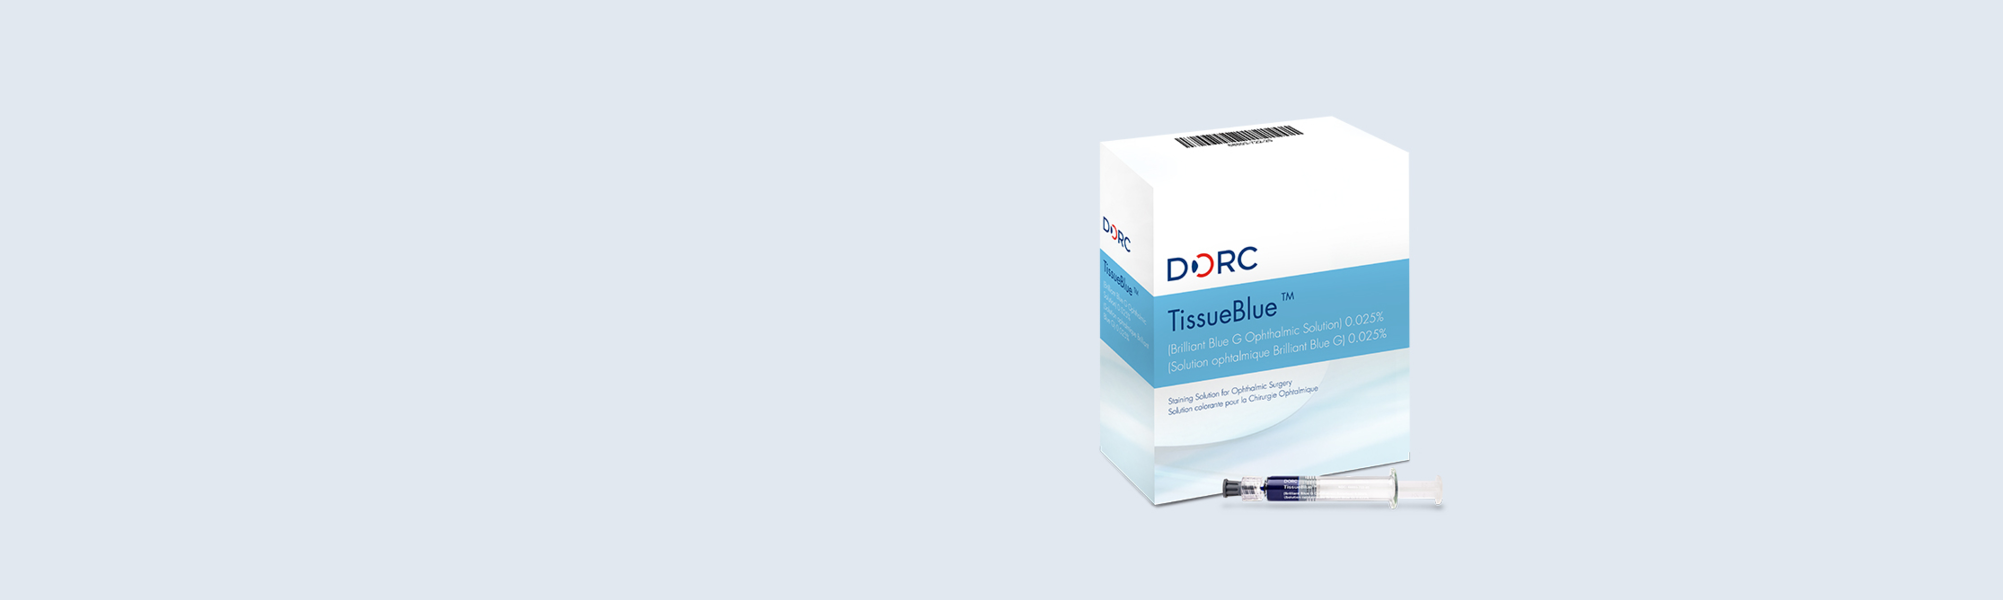 DORC announces Health Canada approval of TissueBlue™ for Staining of the ILM During Vitreoretinal Surgery – the first Health Canada approved product for this indication.